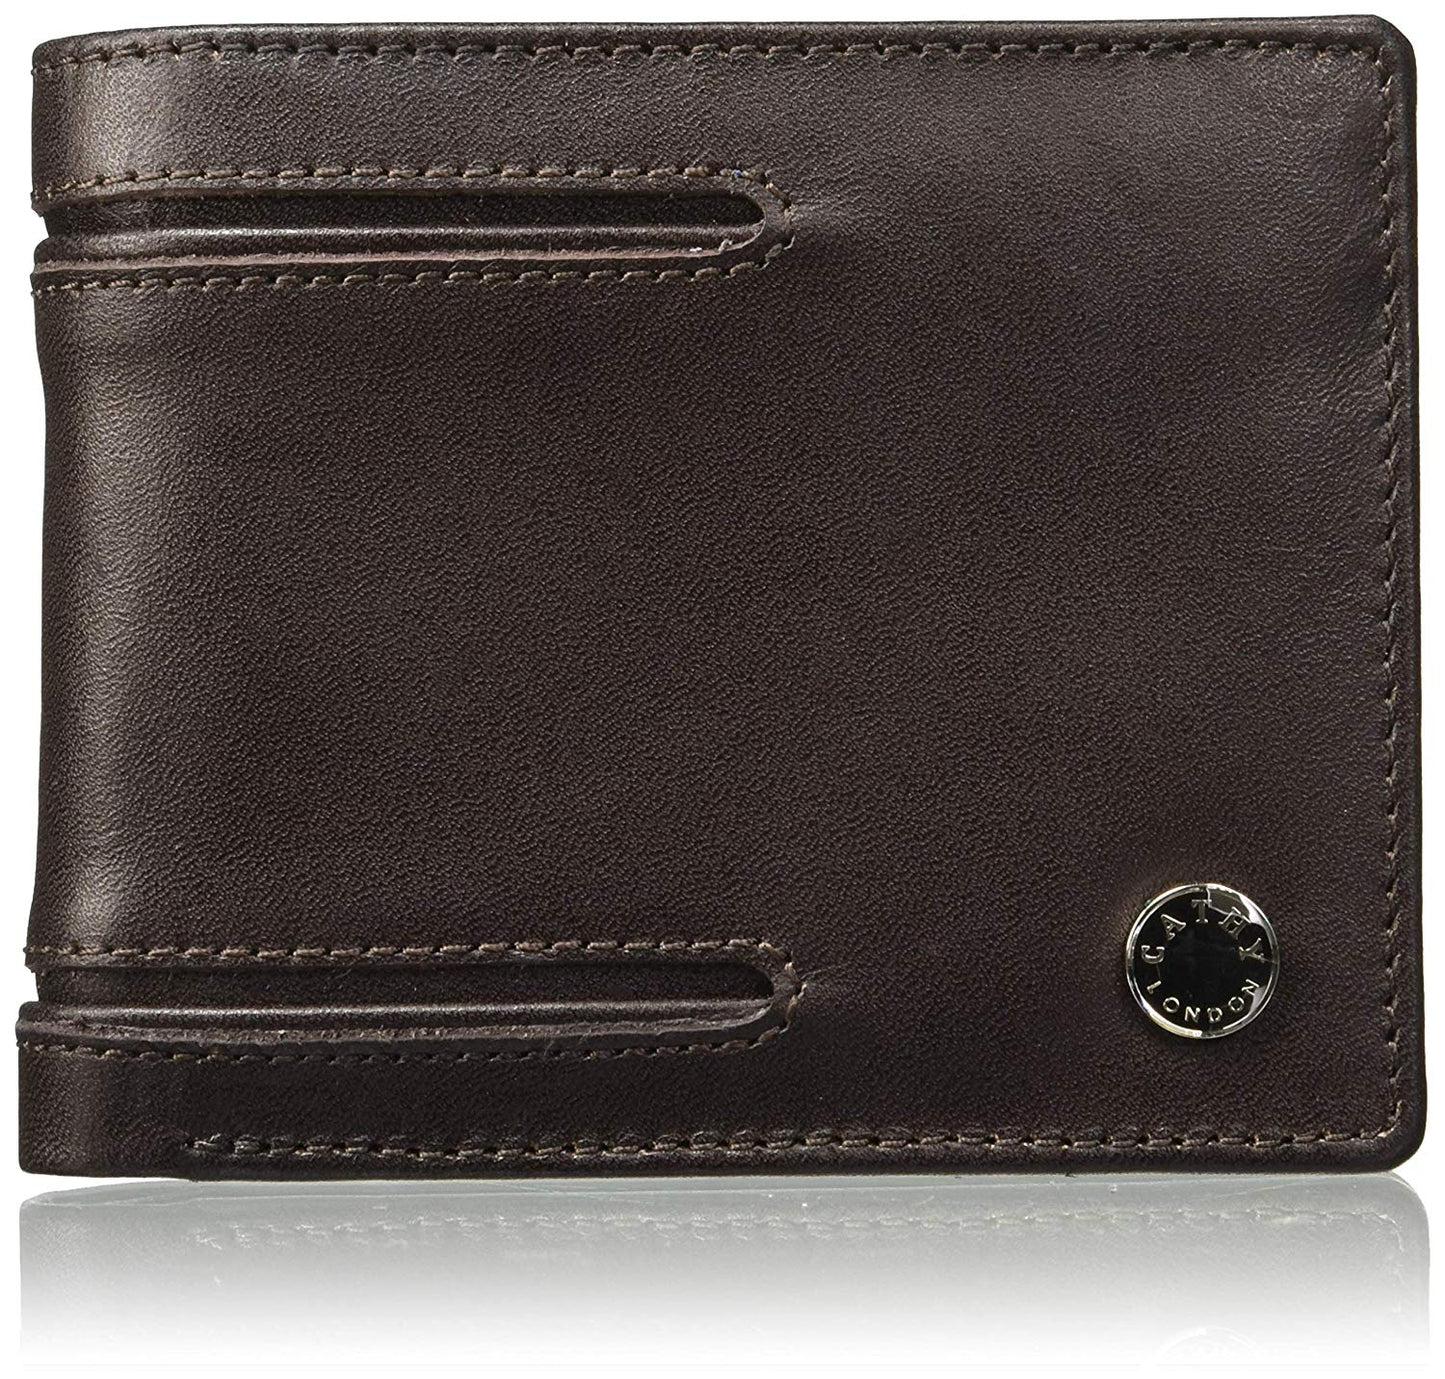 Cathy London Limited Edition RFID Men's Wallet 3 Card Slots with Coin Pocket